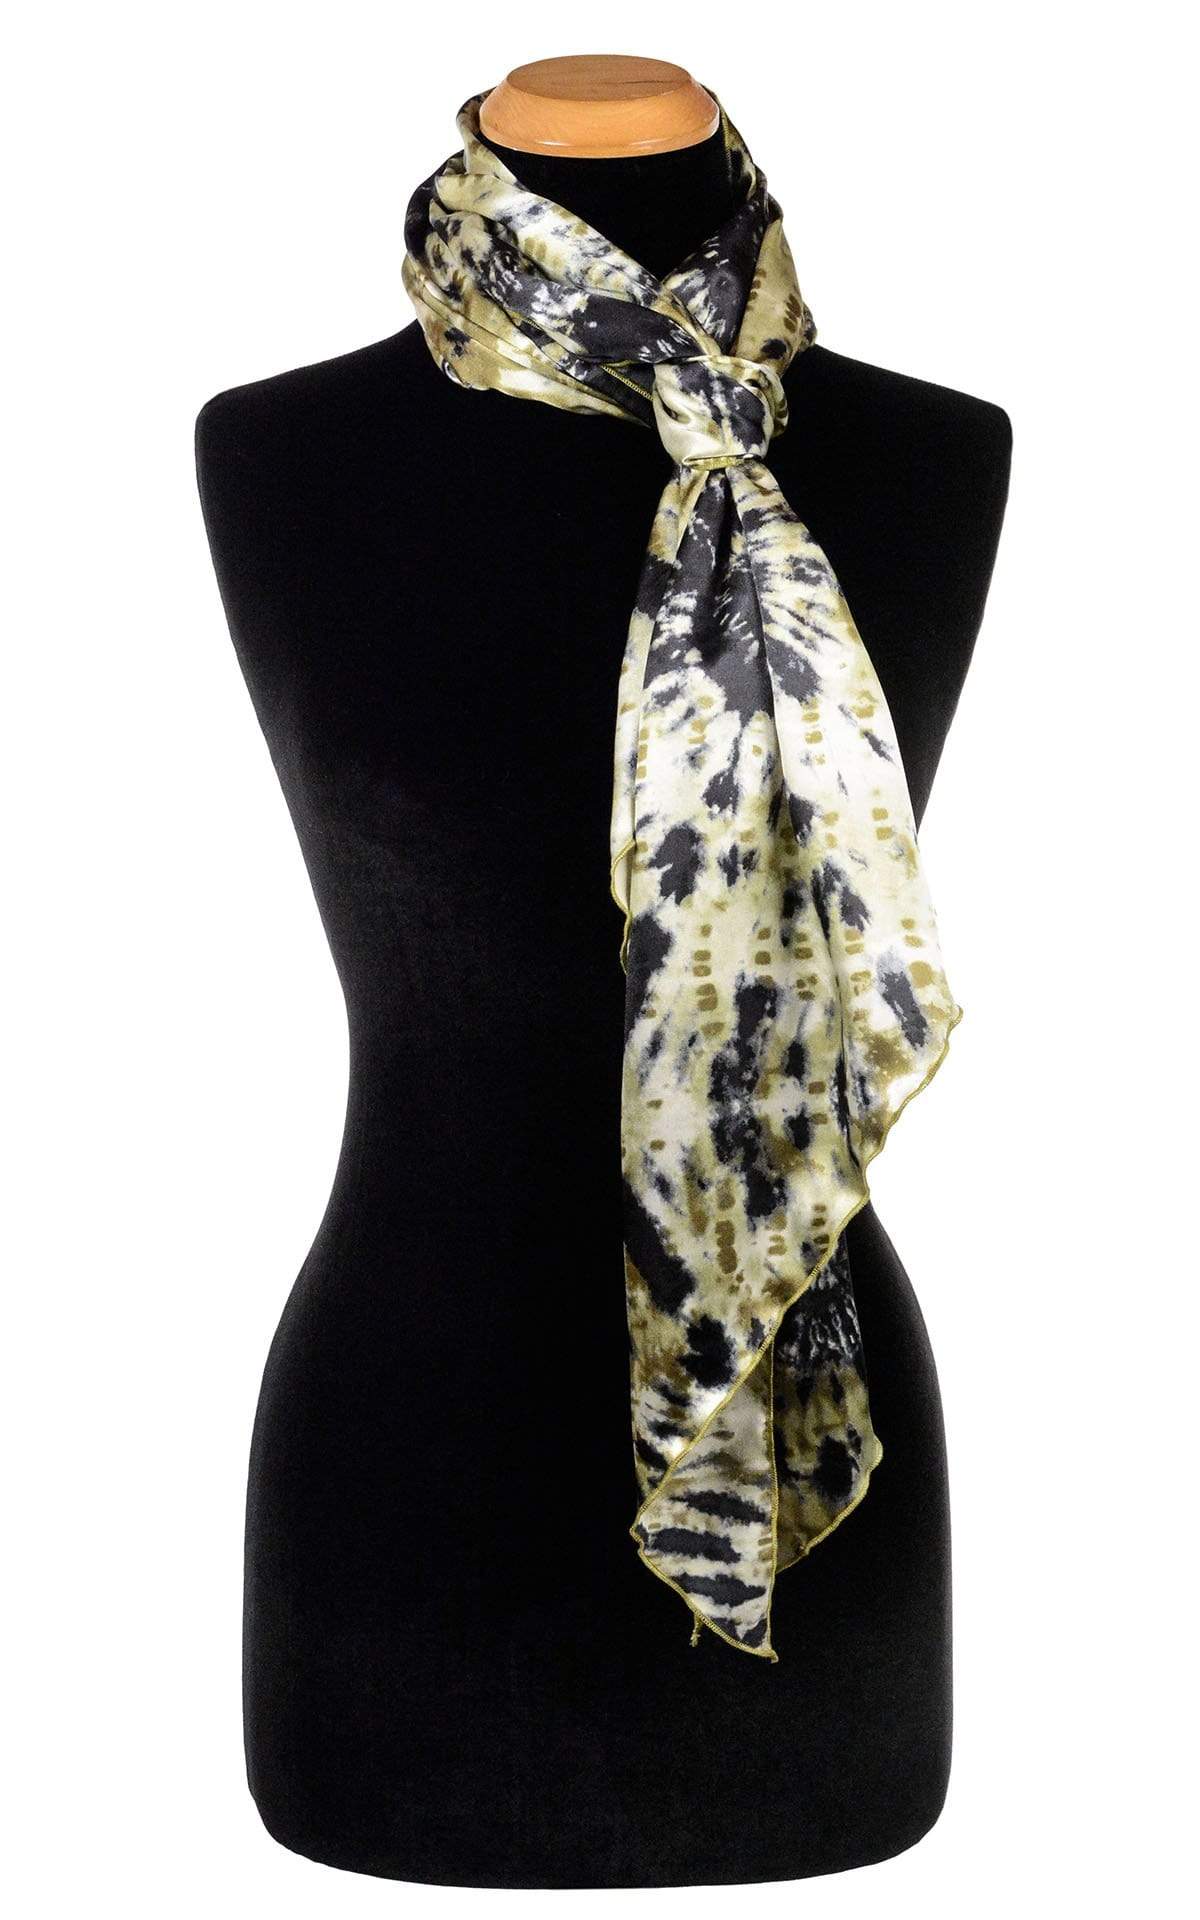 Women’s  Large Handkerchief Scarf, Wrap on Mannequin wrapped tied in front | Egyptian Oasis, Black, Greens, and ivory tie-dye | Handmade in Seattle WA | Pandemonium Millinery